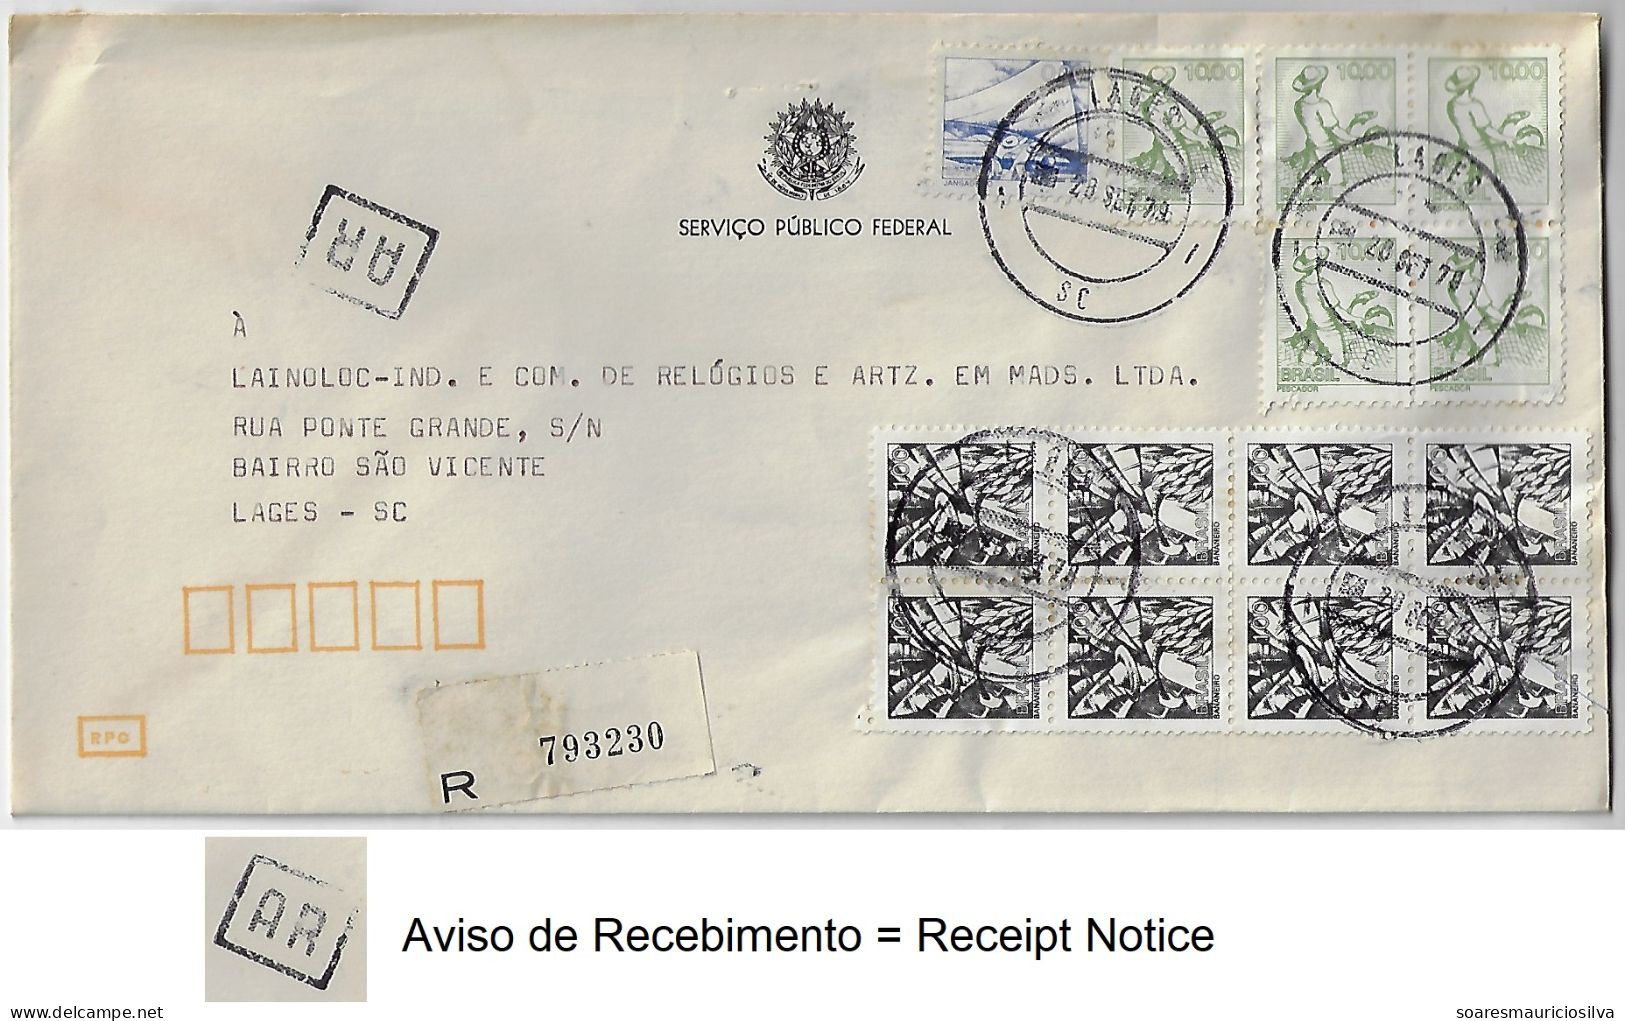 Brazil 1979 Federal Public Service Registered Cover Notice Of Receipt Shipped In Lages Stamp Jangadeiro Fisherman Banana - Covers & Documents